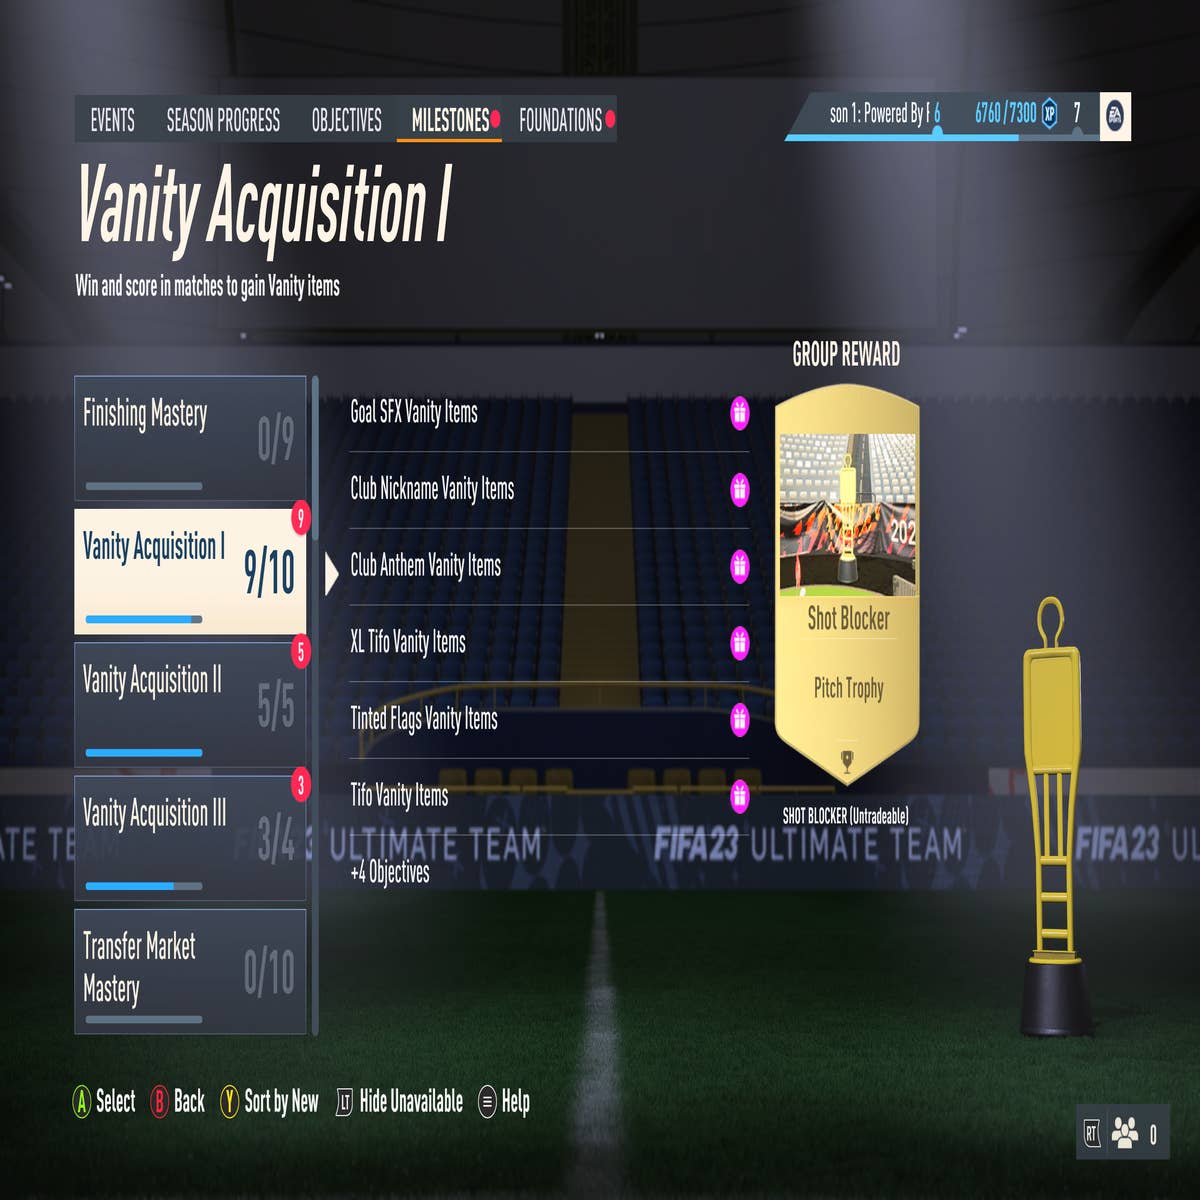 Solved: Re: EA Sports FC24 Ultimate Team Web App - Page 3 - Answer HQ